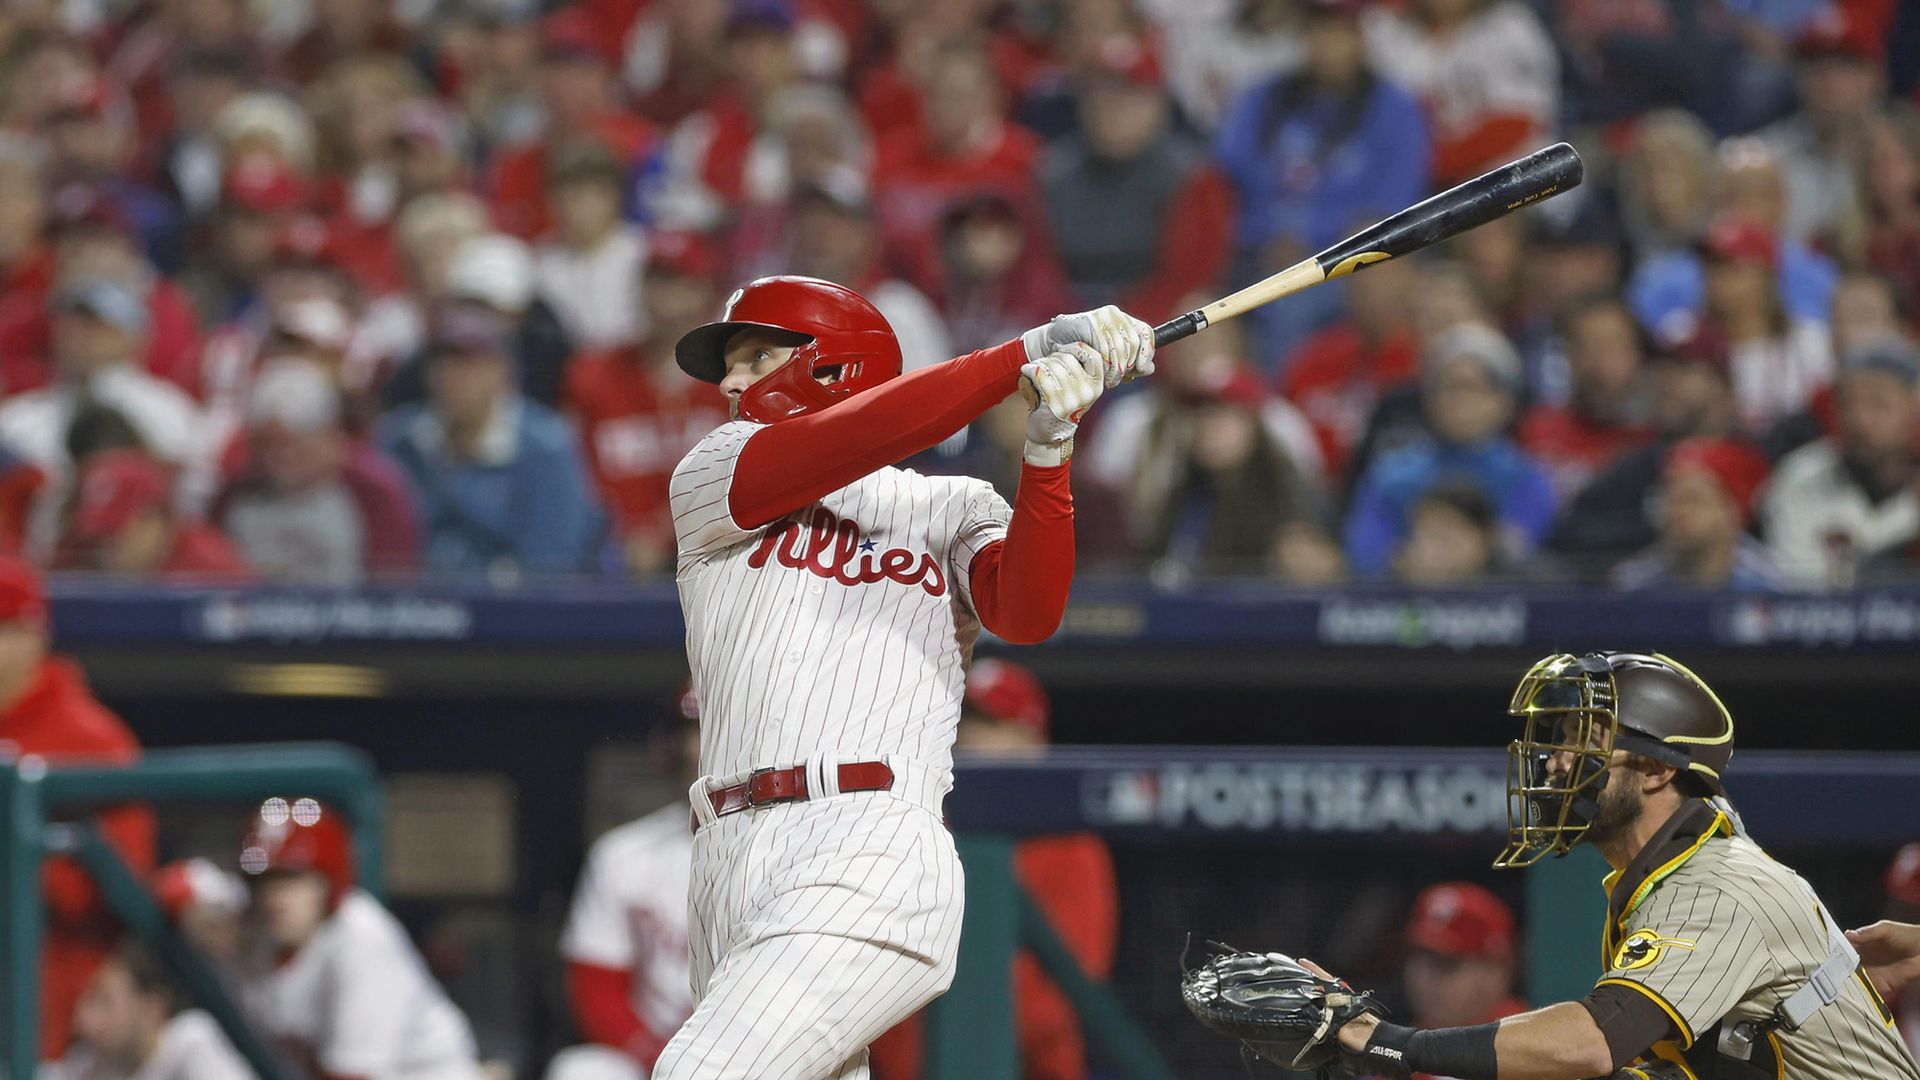 Padres vs Phillies live streams 2022 How to watch NLCS Game 5 online